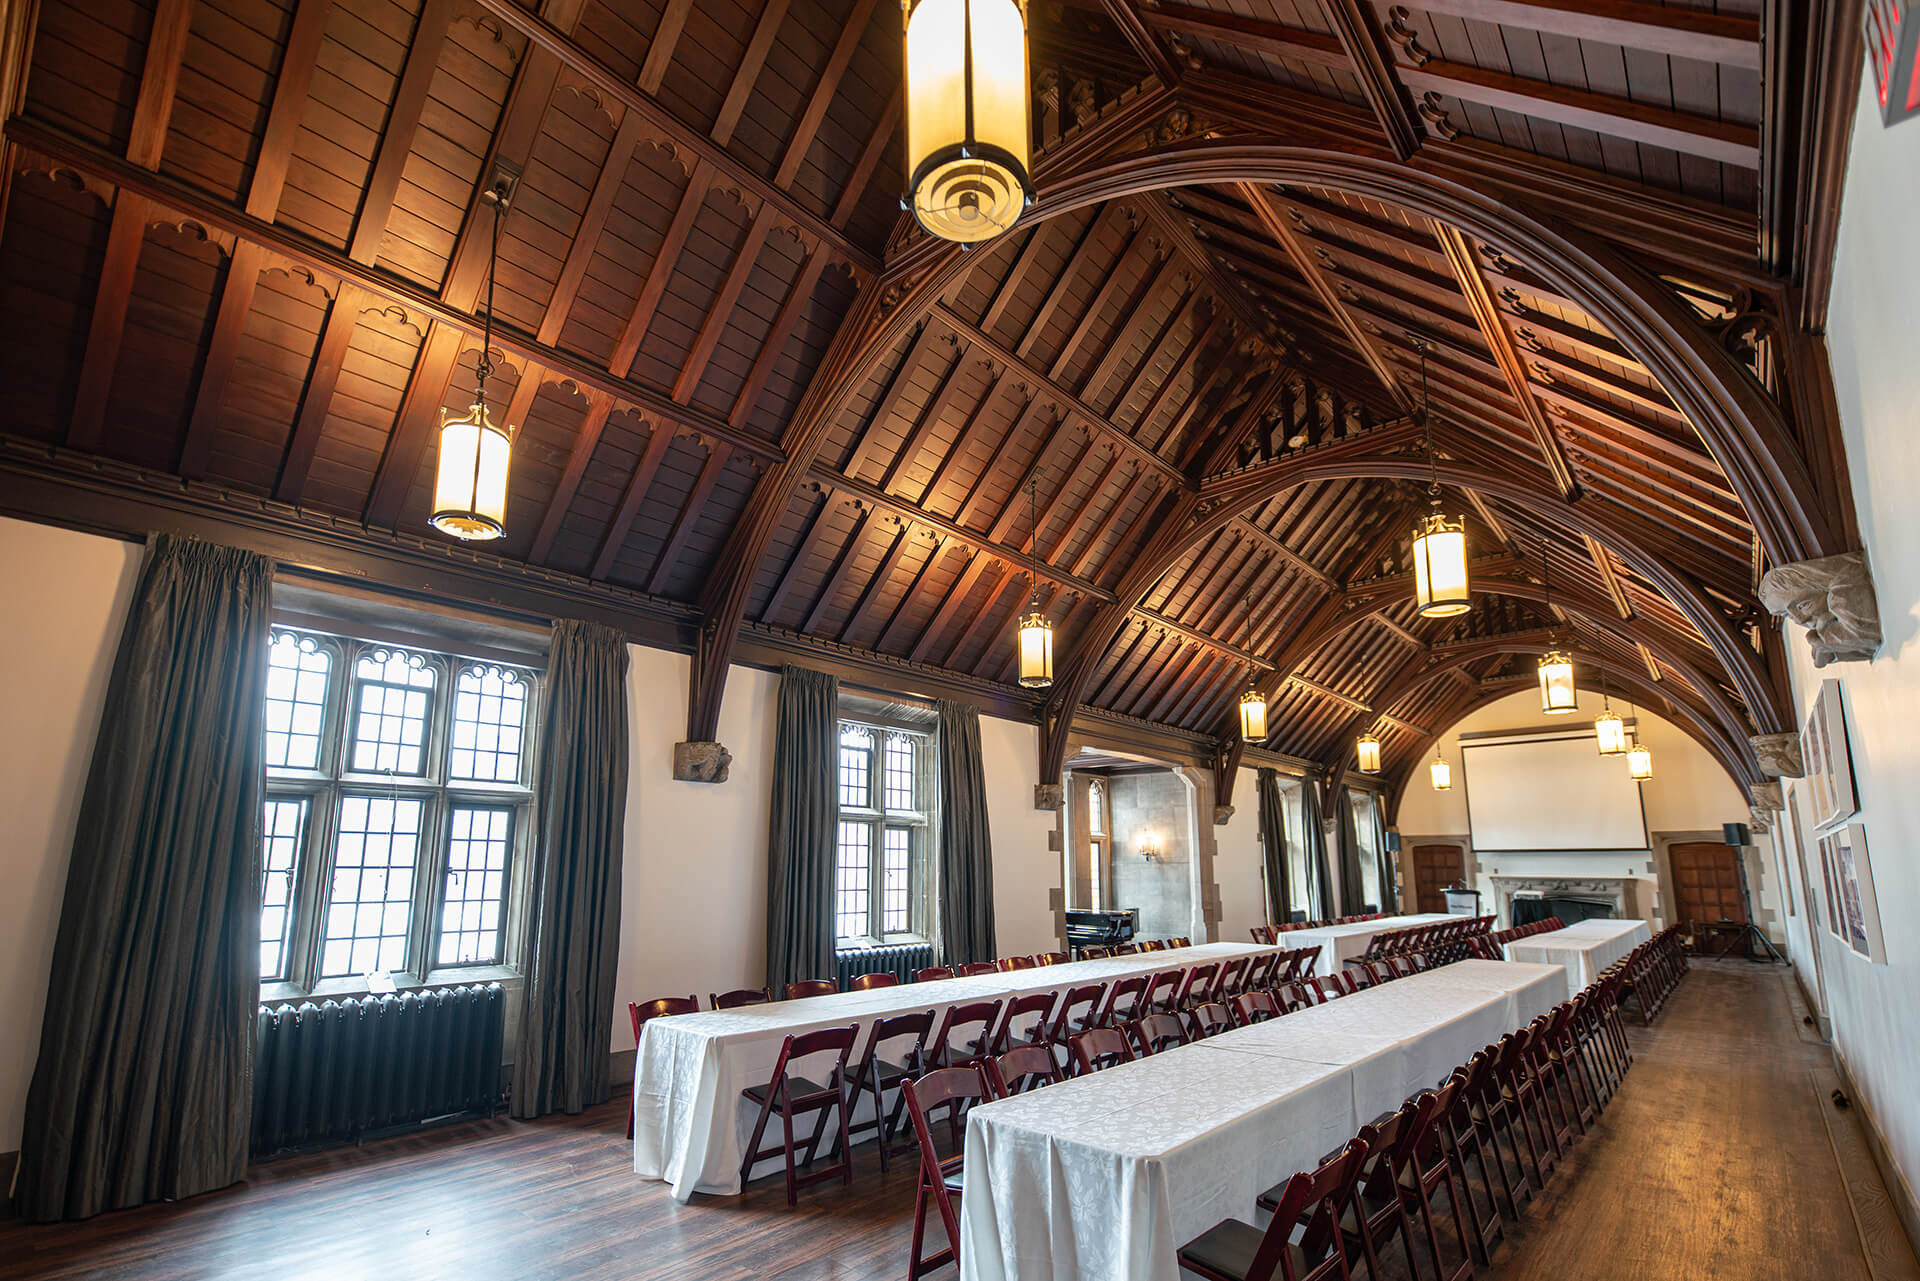 A large room with hardwood floors, gothic windows, vaulted wooden ceiling and tables with seating arranged for an event